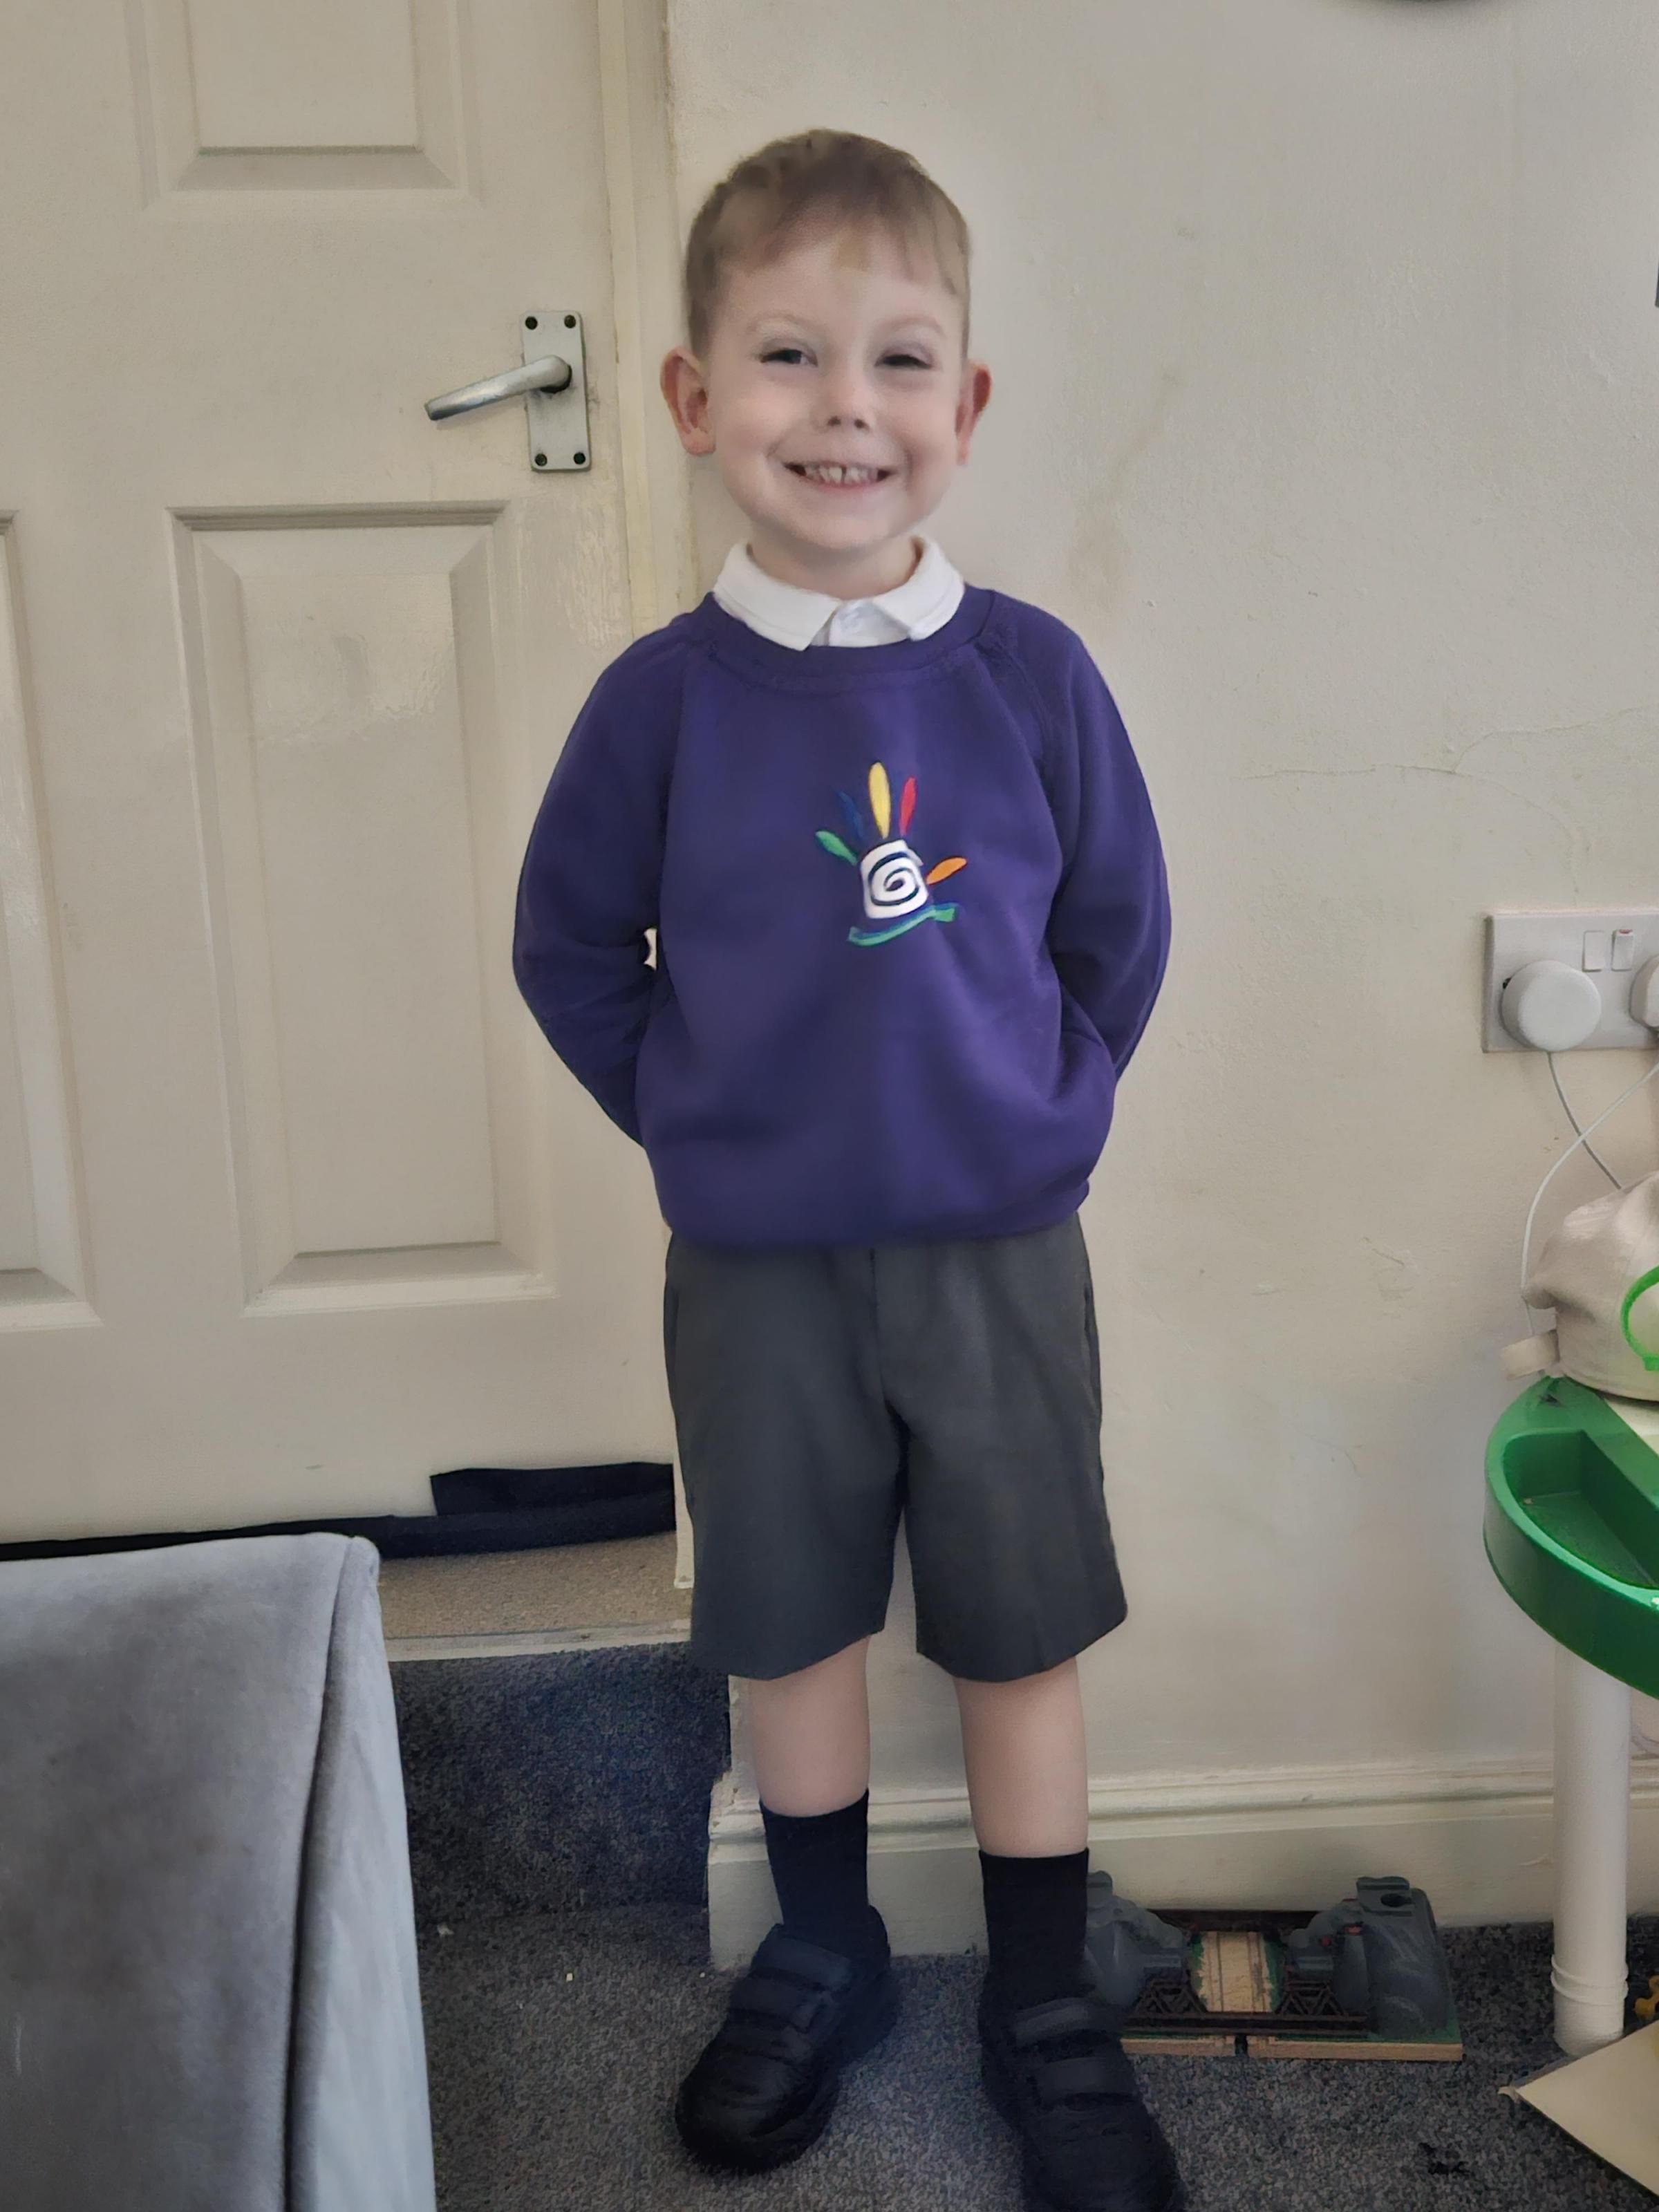 Selina Callender-Robins, from Connahs Quay: Cody Callender-Robins, going to Ysgol Caer Nant.